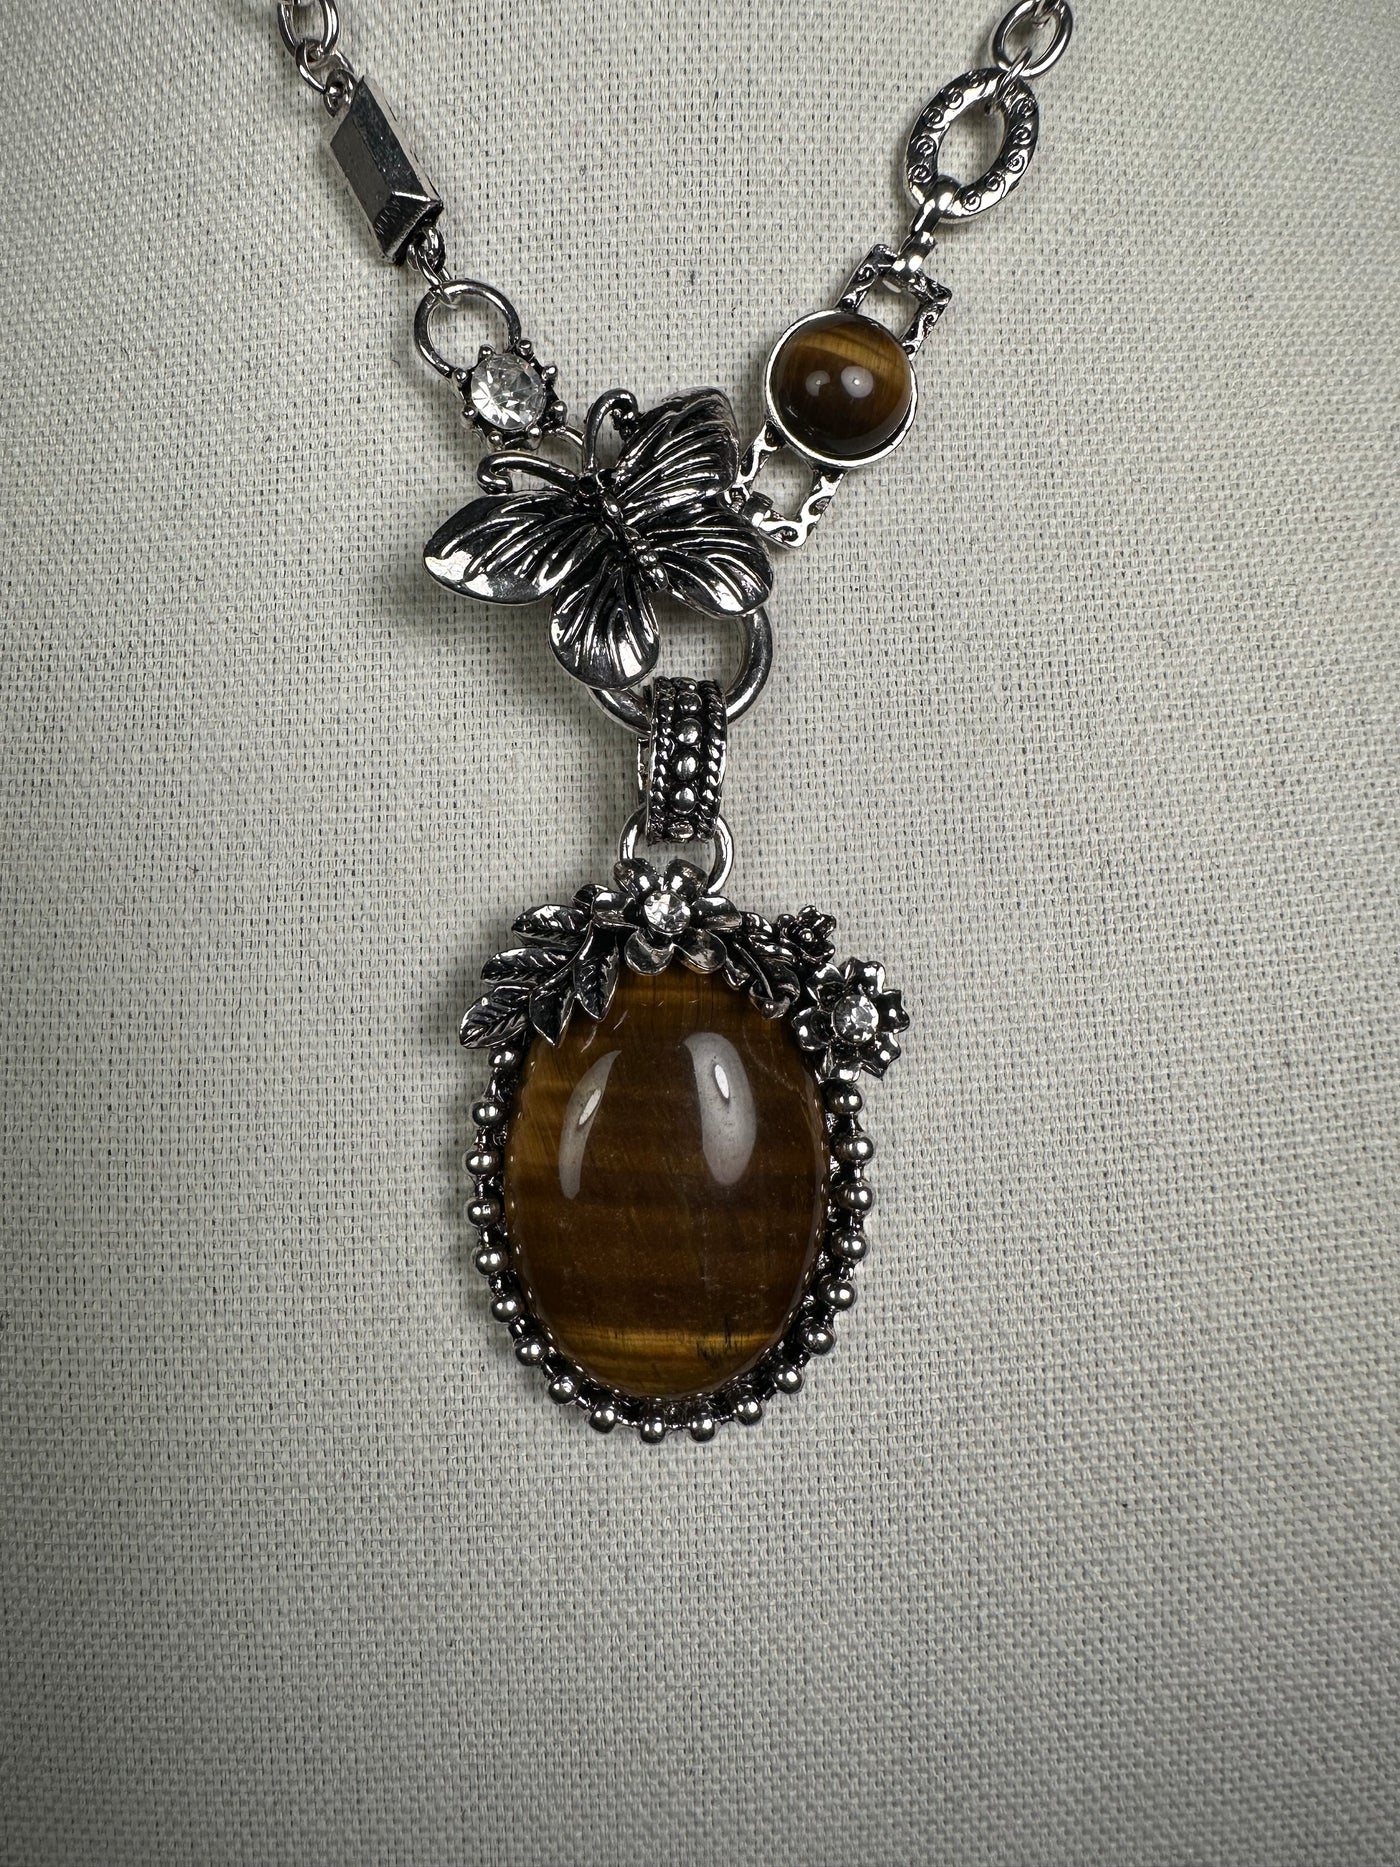 Silver Tone Necklace with an Ornate Oval Howlite Tiger Eye Drop